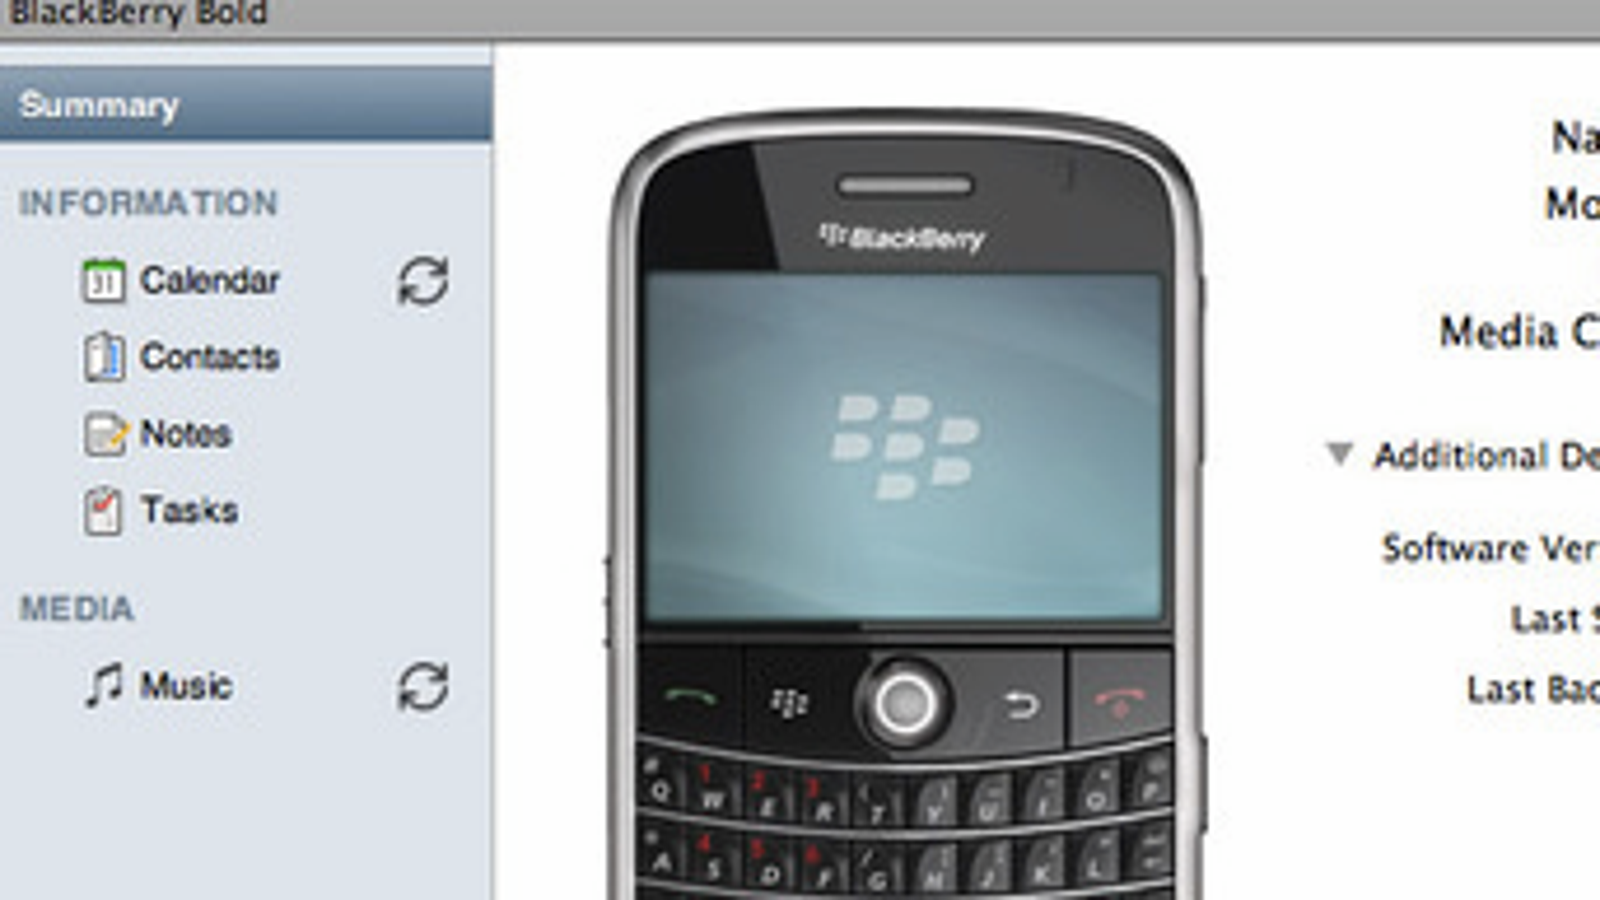 blackberry software for mac